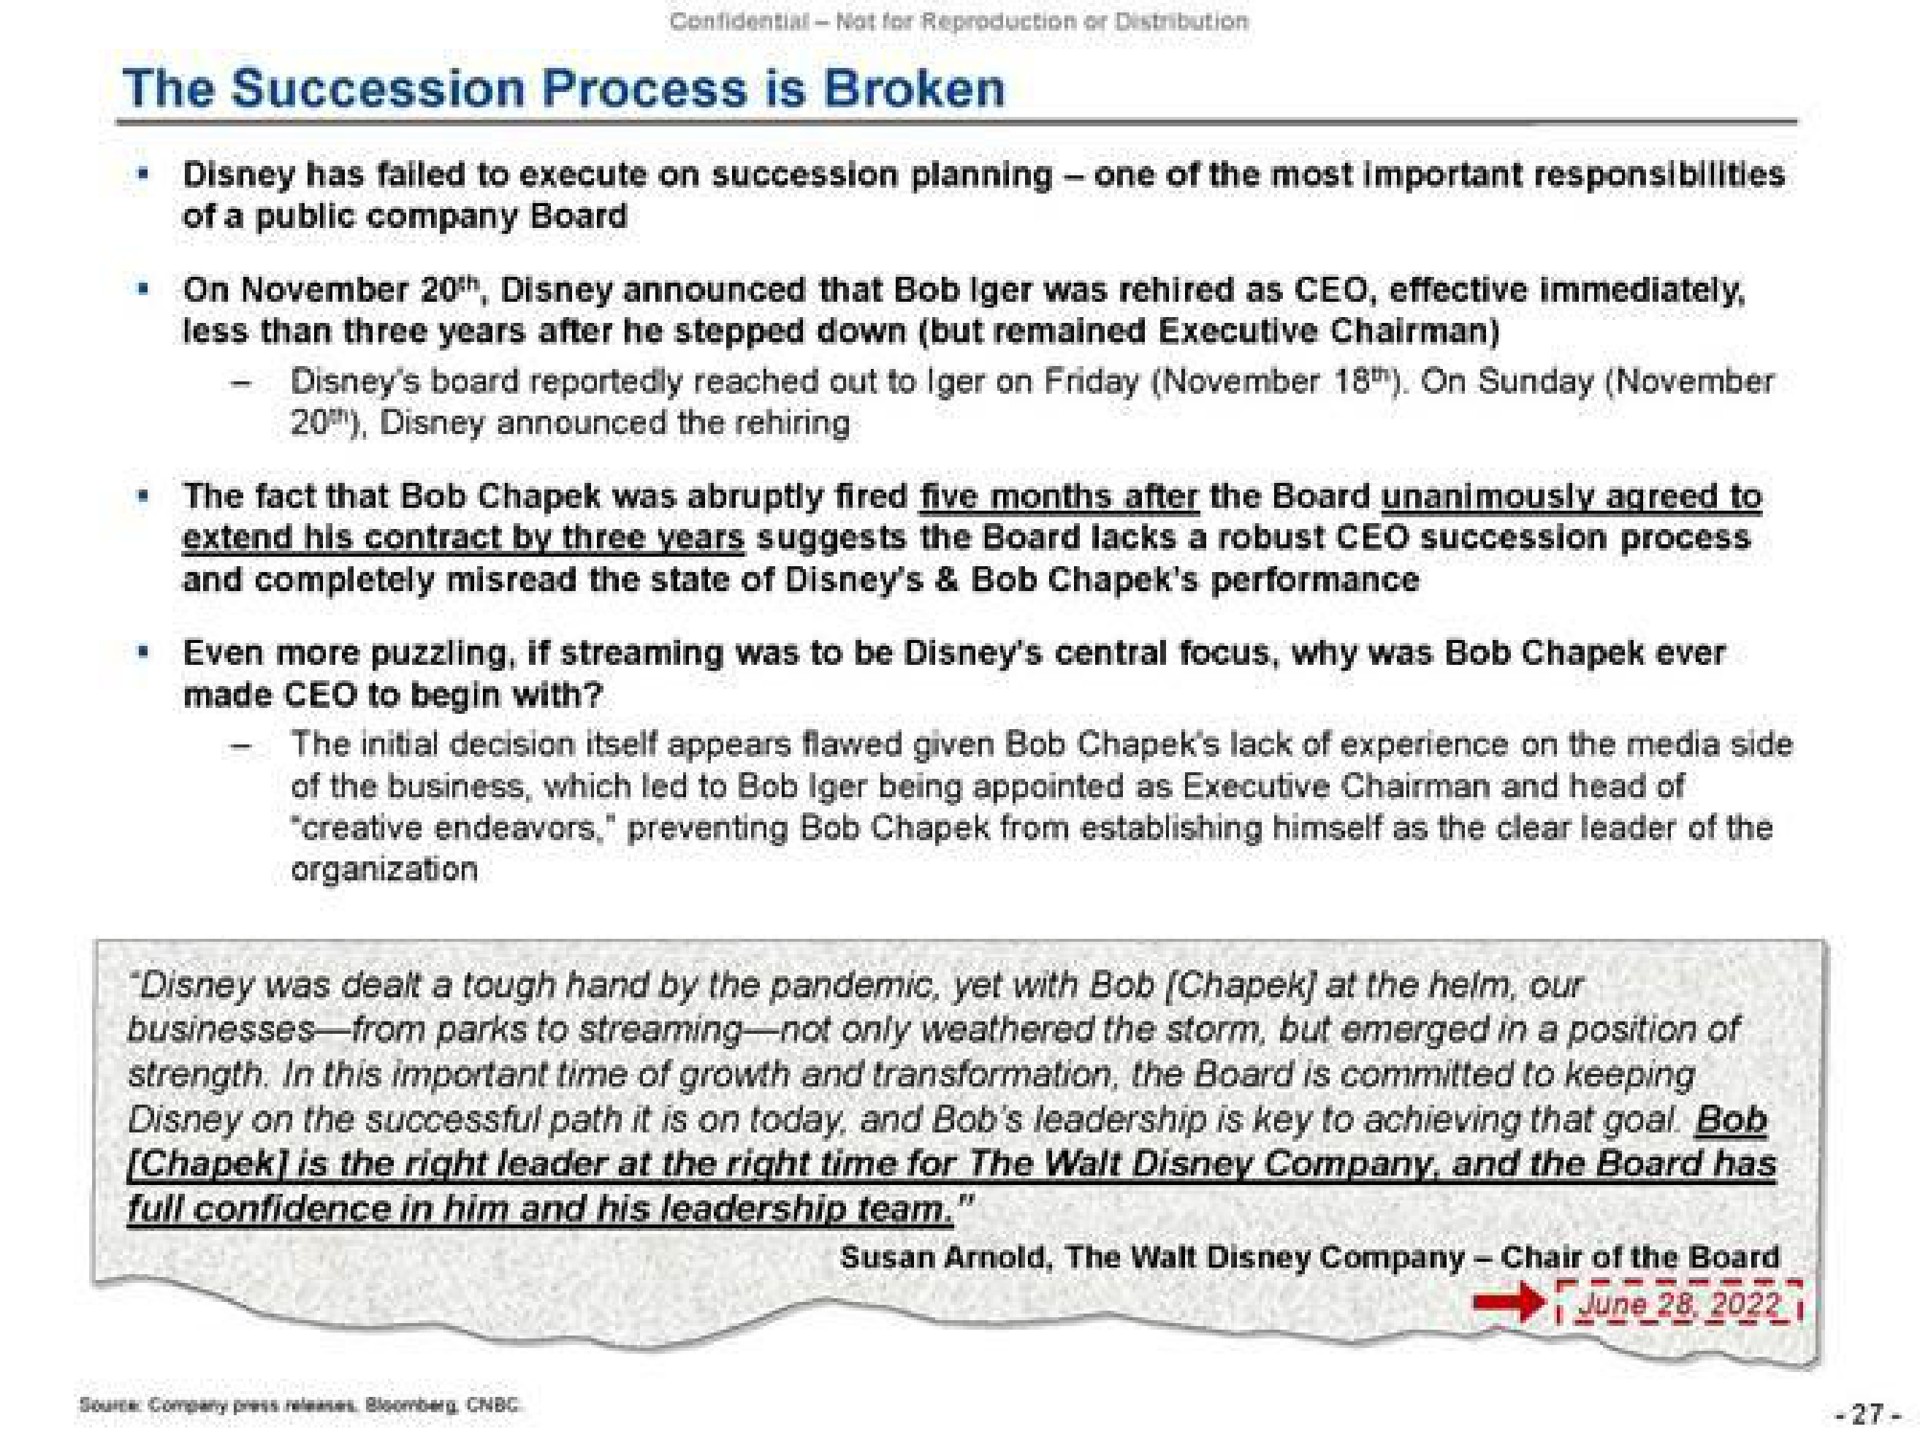 the succession process is broken has failed to execute on succession planning one of the most important responsibilities less than three years after he stepped down but remained executive chairman board reportedly reached to on on by three years suggests the board lacks a robust succession process extend his contract and completely misread the state of bob performance even more puzzling if streaming was to be central focus why was bob ever made to begin with the decision itself appears flawed given bob lack of experience on the media side of the business which led to bob being appointed as executive chairman and head of creative endeavors preventing bob from establishing himself as the clear leader of the the was dealt a tough hand by the pandemic yet with bob at the helm our businesses from parks to streaming not only weathered the storm but emerged in a position of strength in this important time of growth and transformation the board is committed to keeping on successful pan it is on today and leadership is key achieving bob | Trian Partners